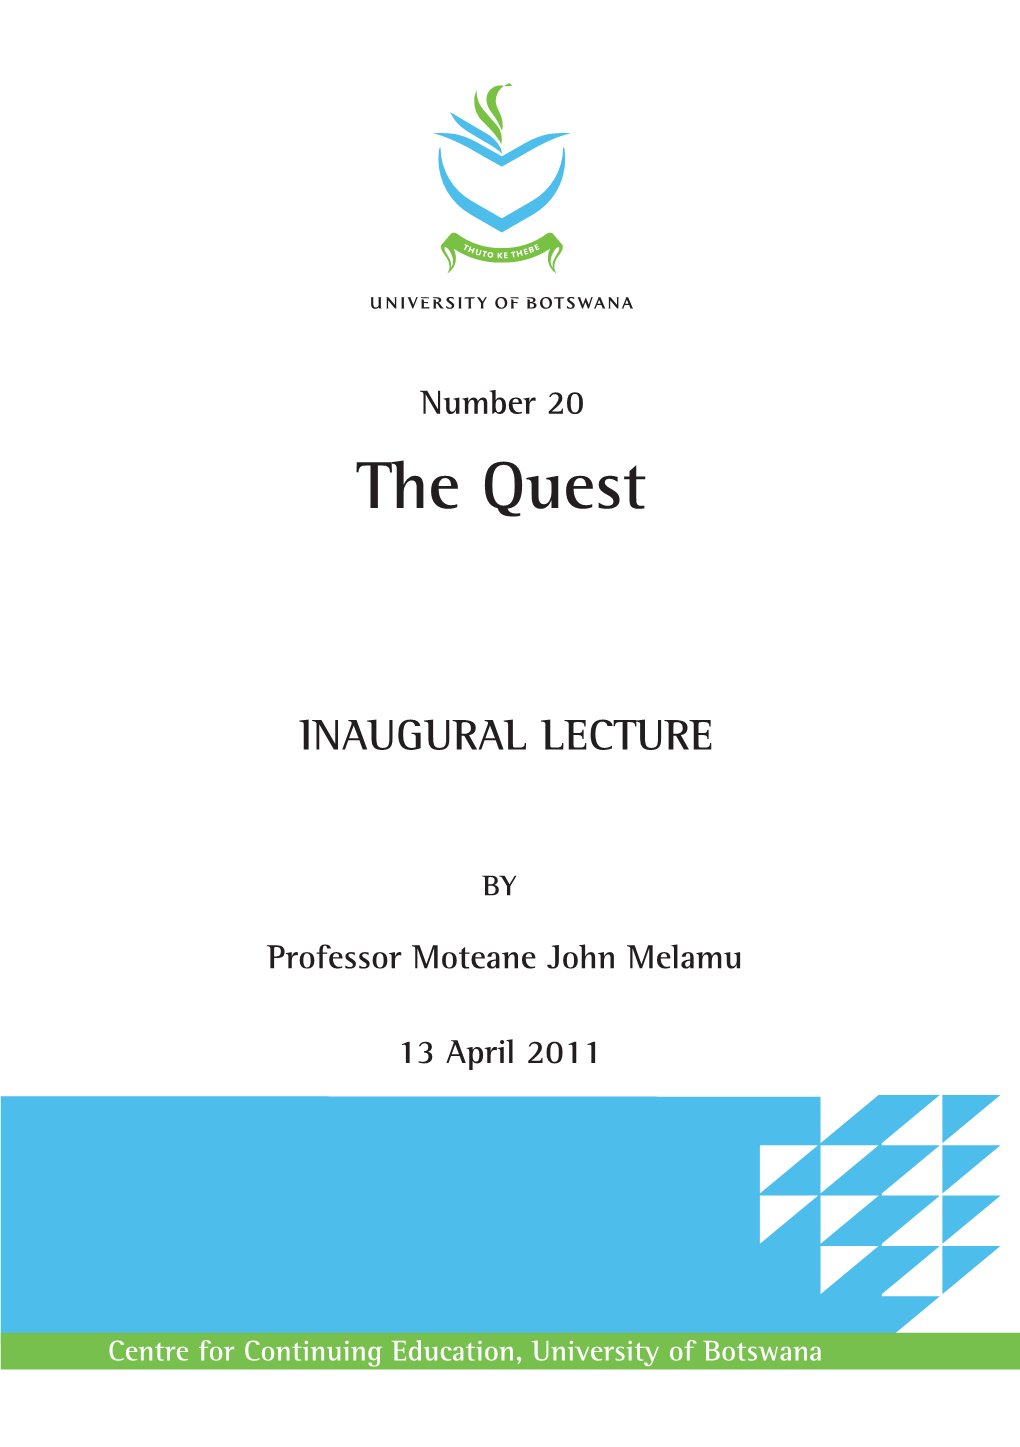 The Quest the Botswana Campus